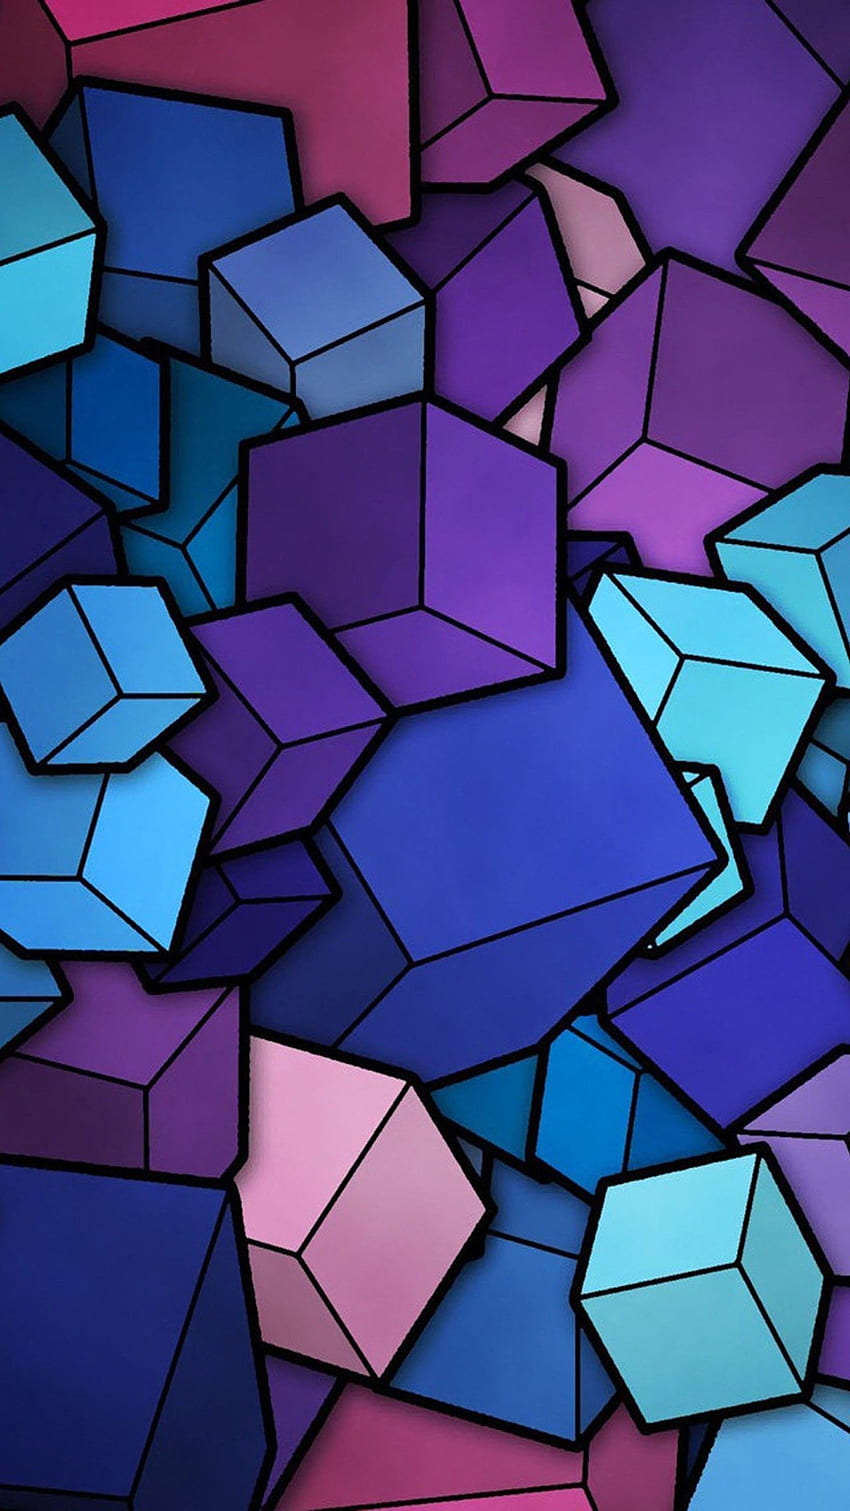 Abstract Cubes Blue Purple Galaxy S6, LG G4, HTC One M9. Cool for ...